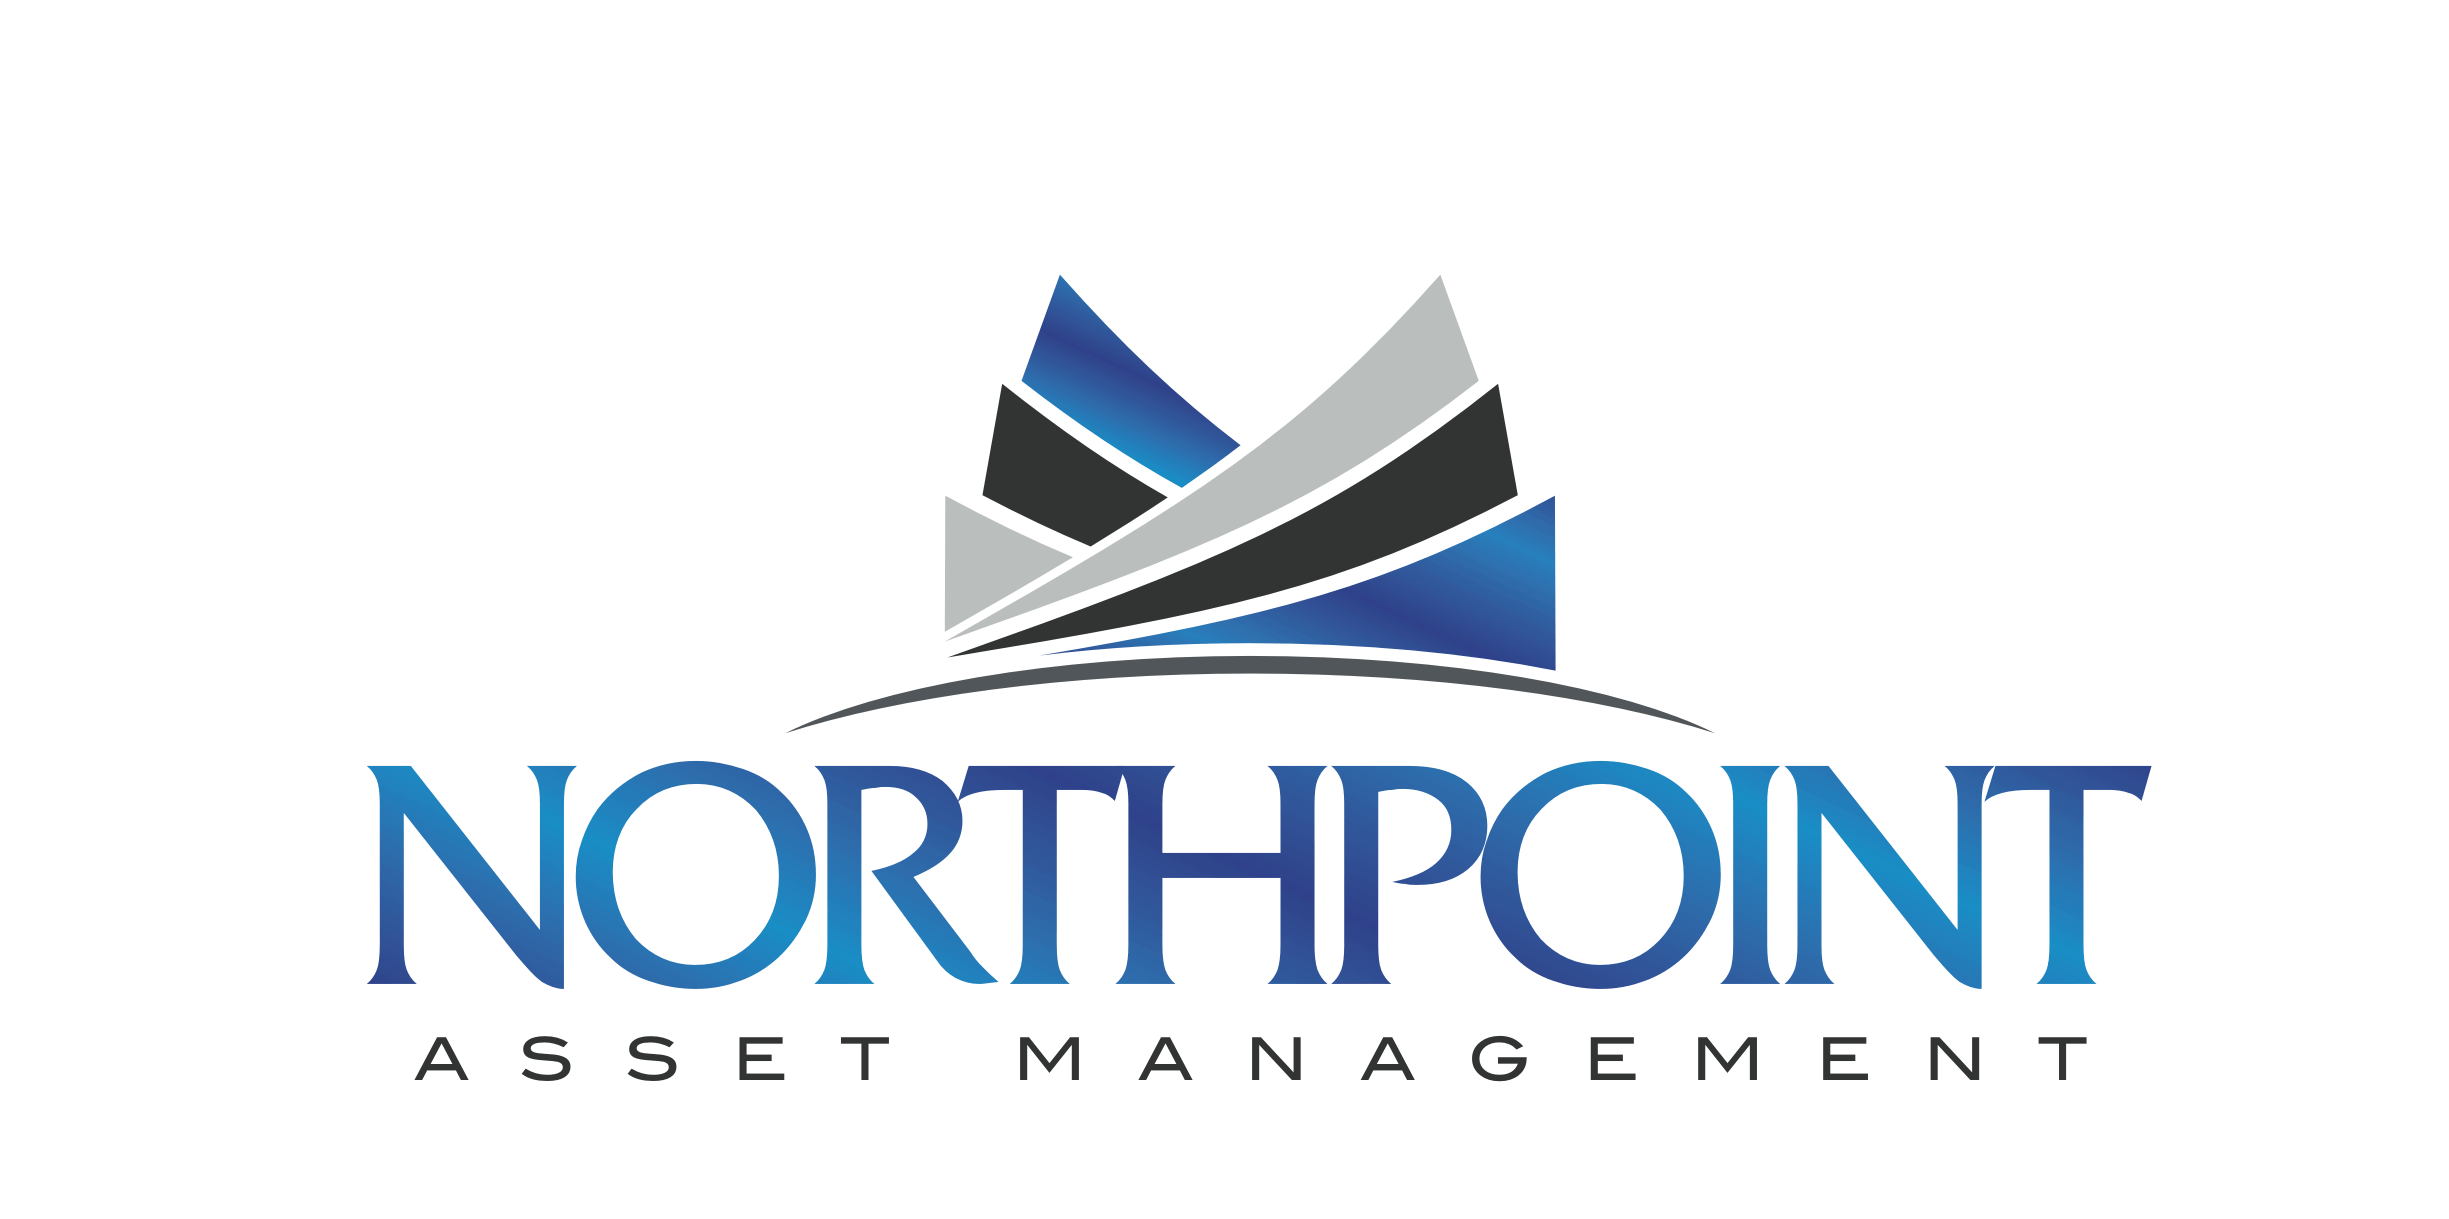 Northpoint Asset Management - Tampa logo